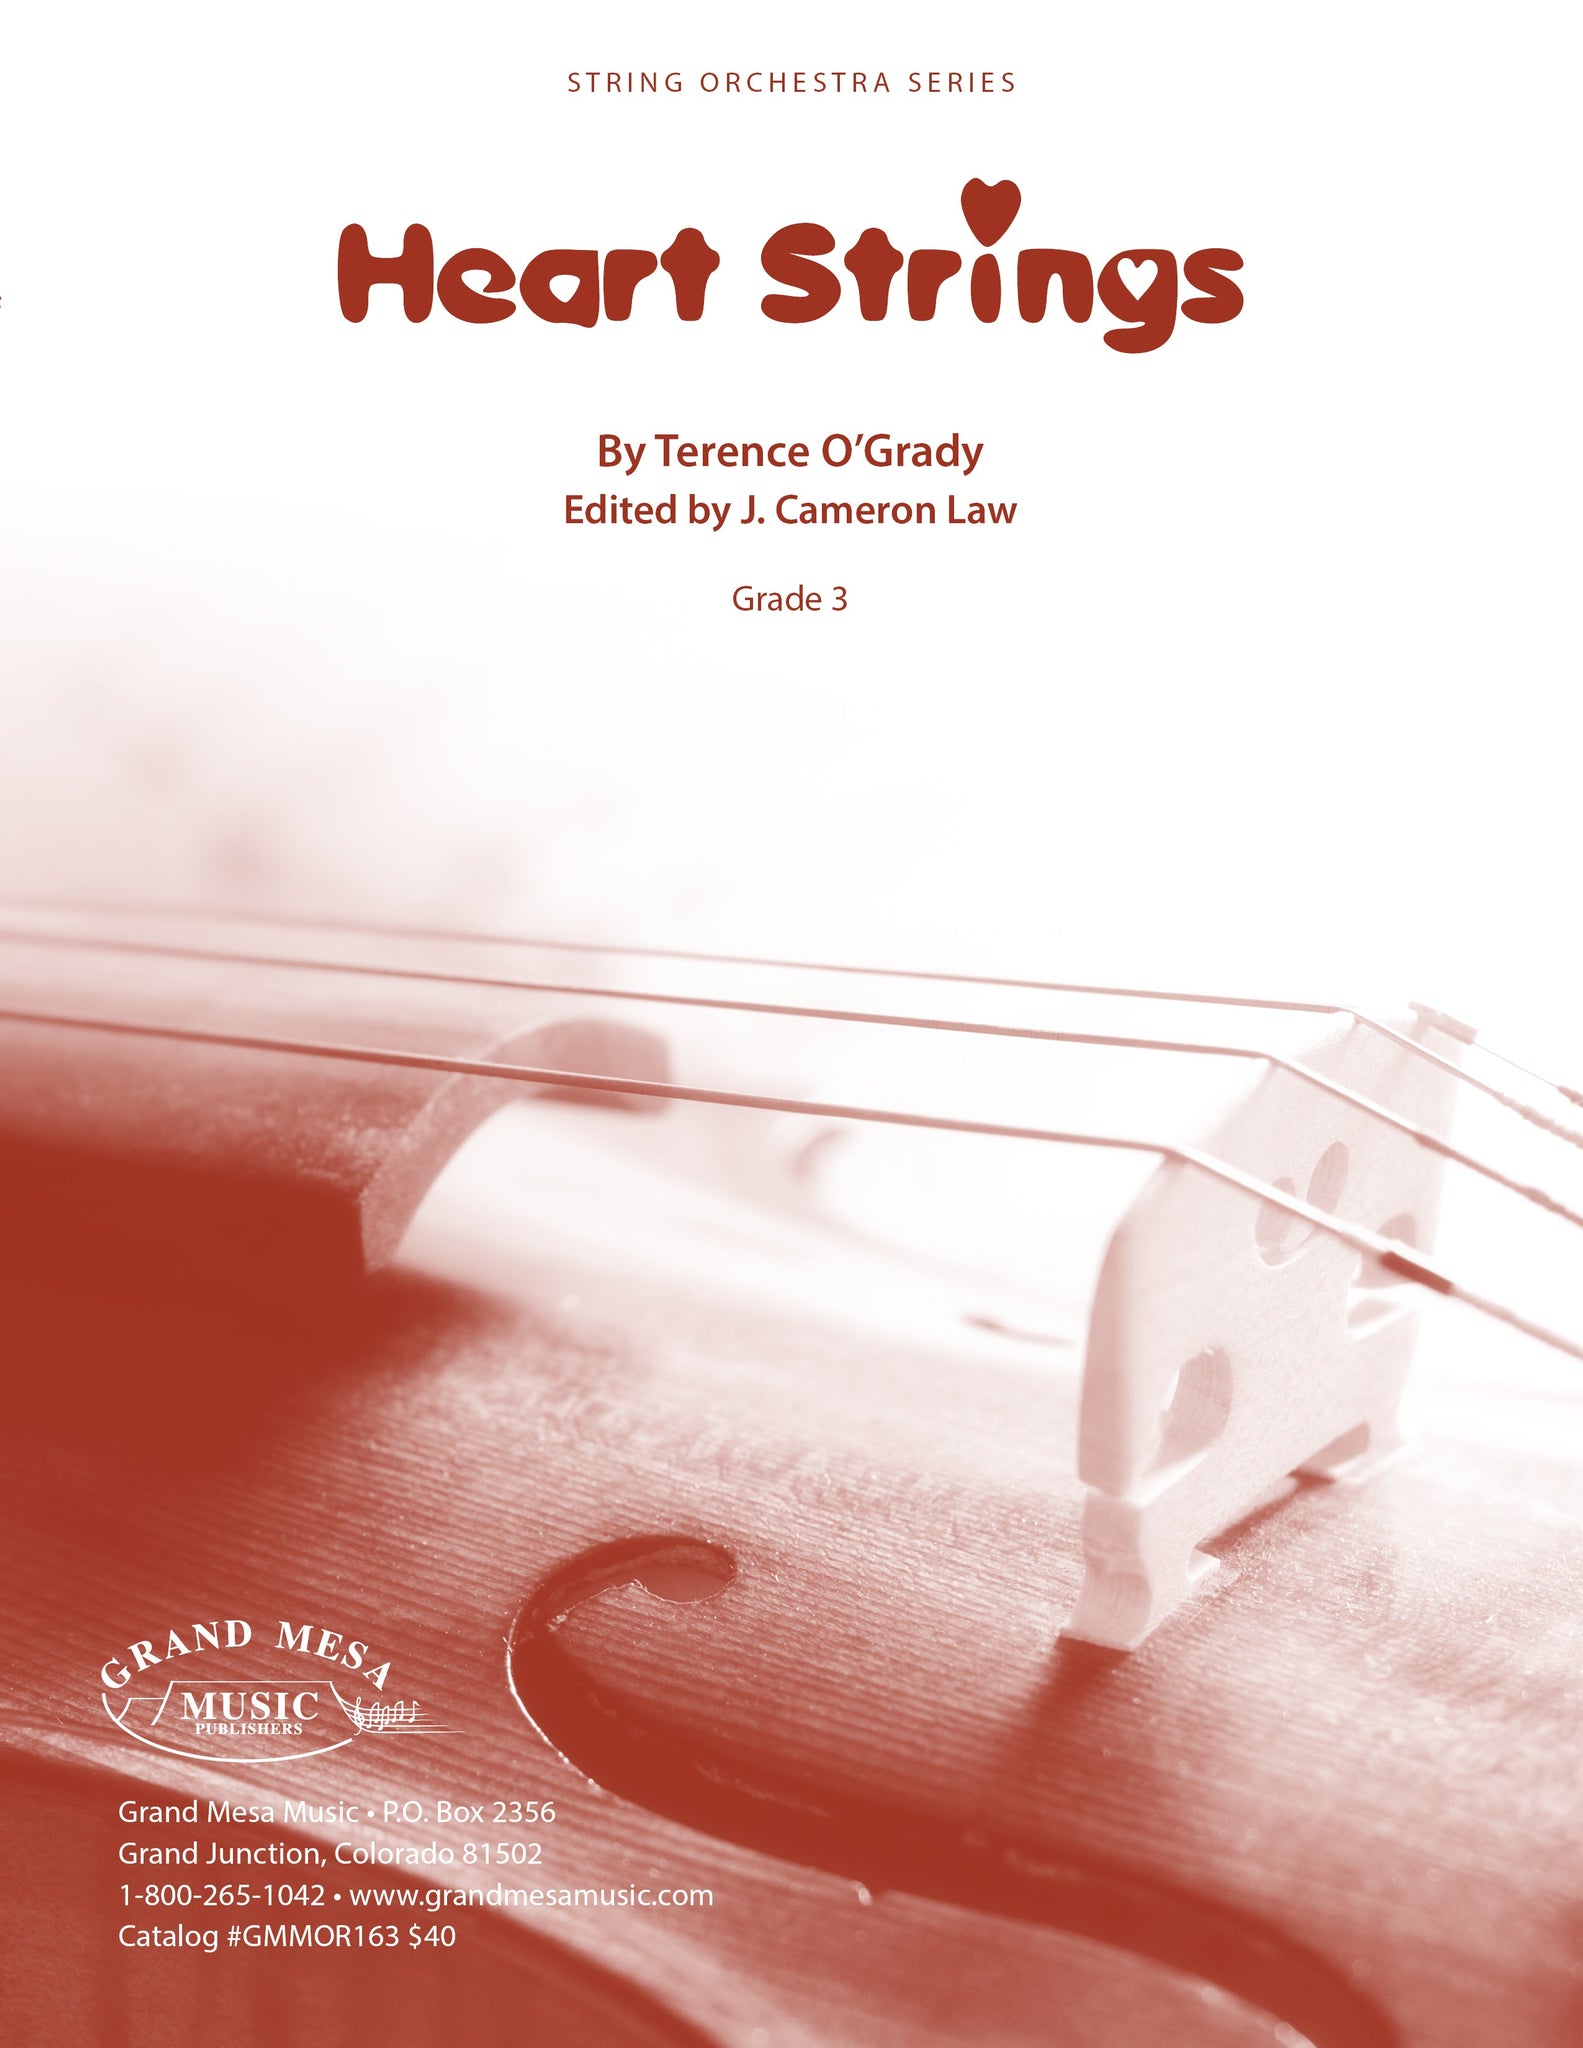 Strings sheet music cover of Heart Strings, composed by Terence O'Grady.